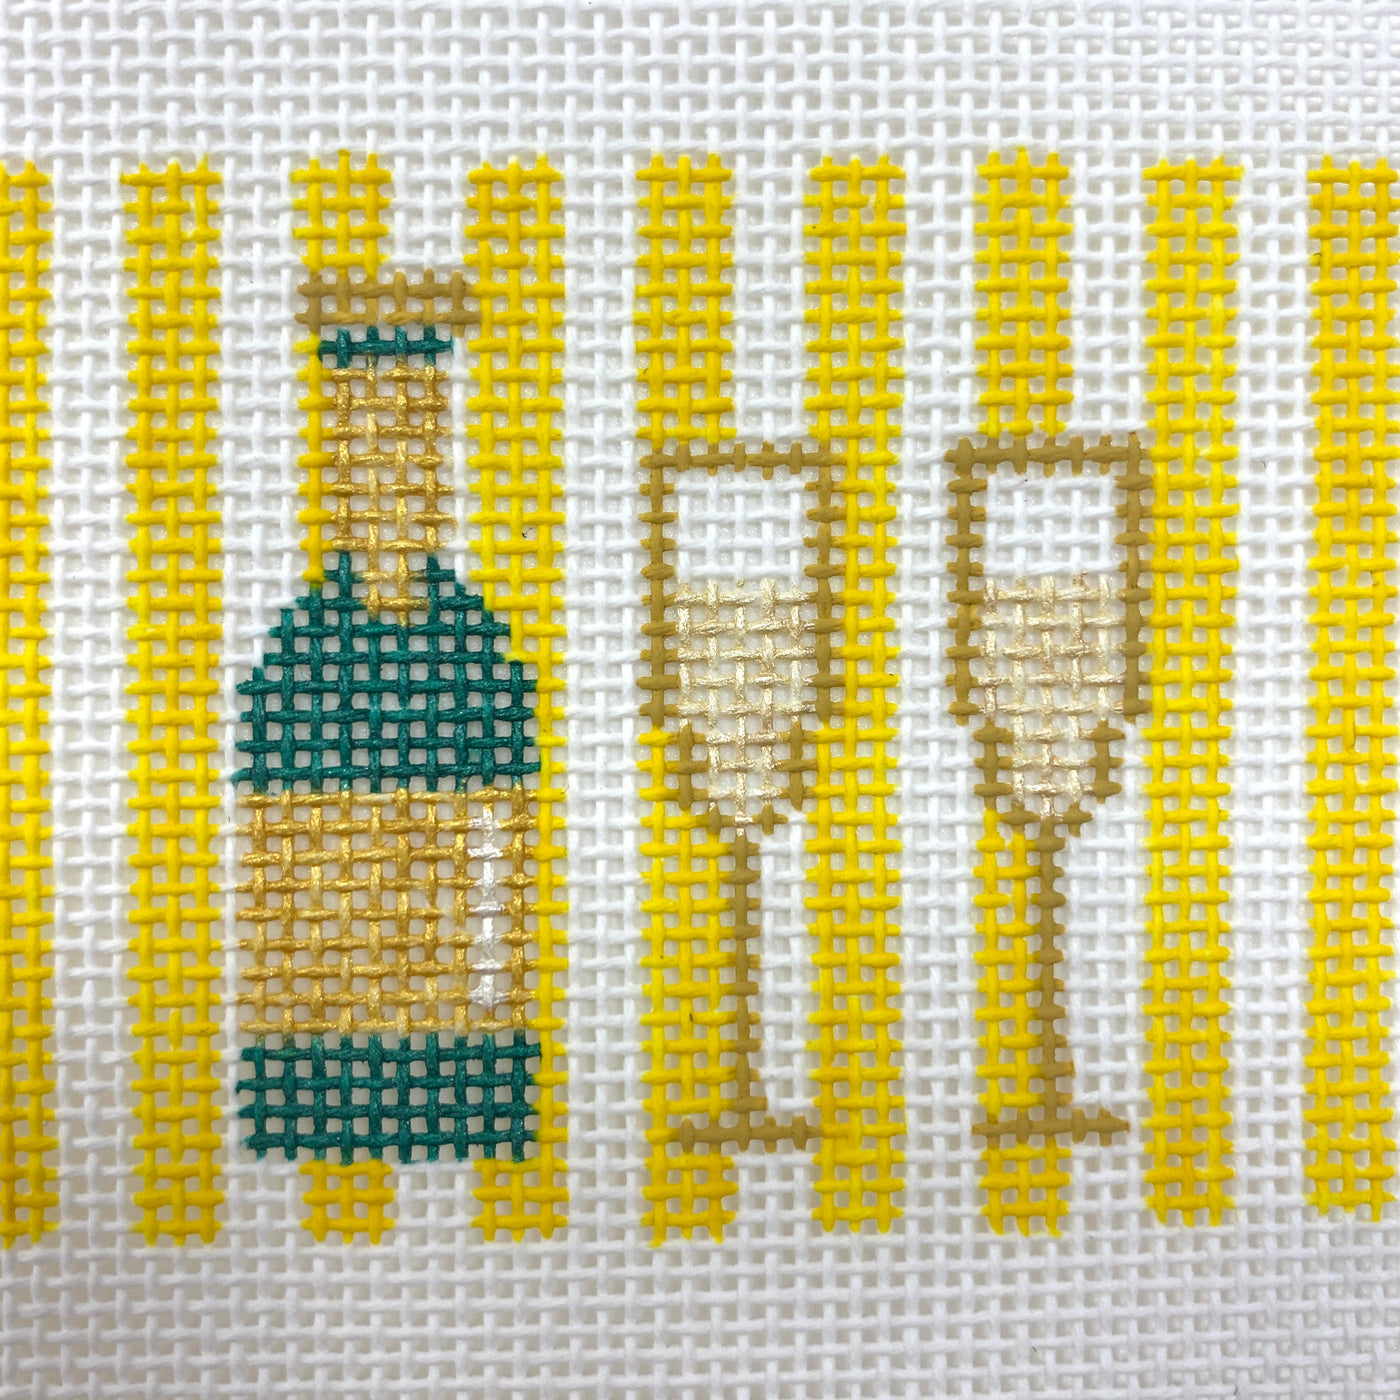 Champagne and Two Glasses Insert Yellow Needlepoint Canvas